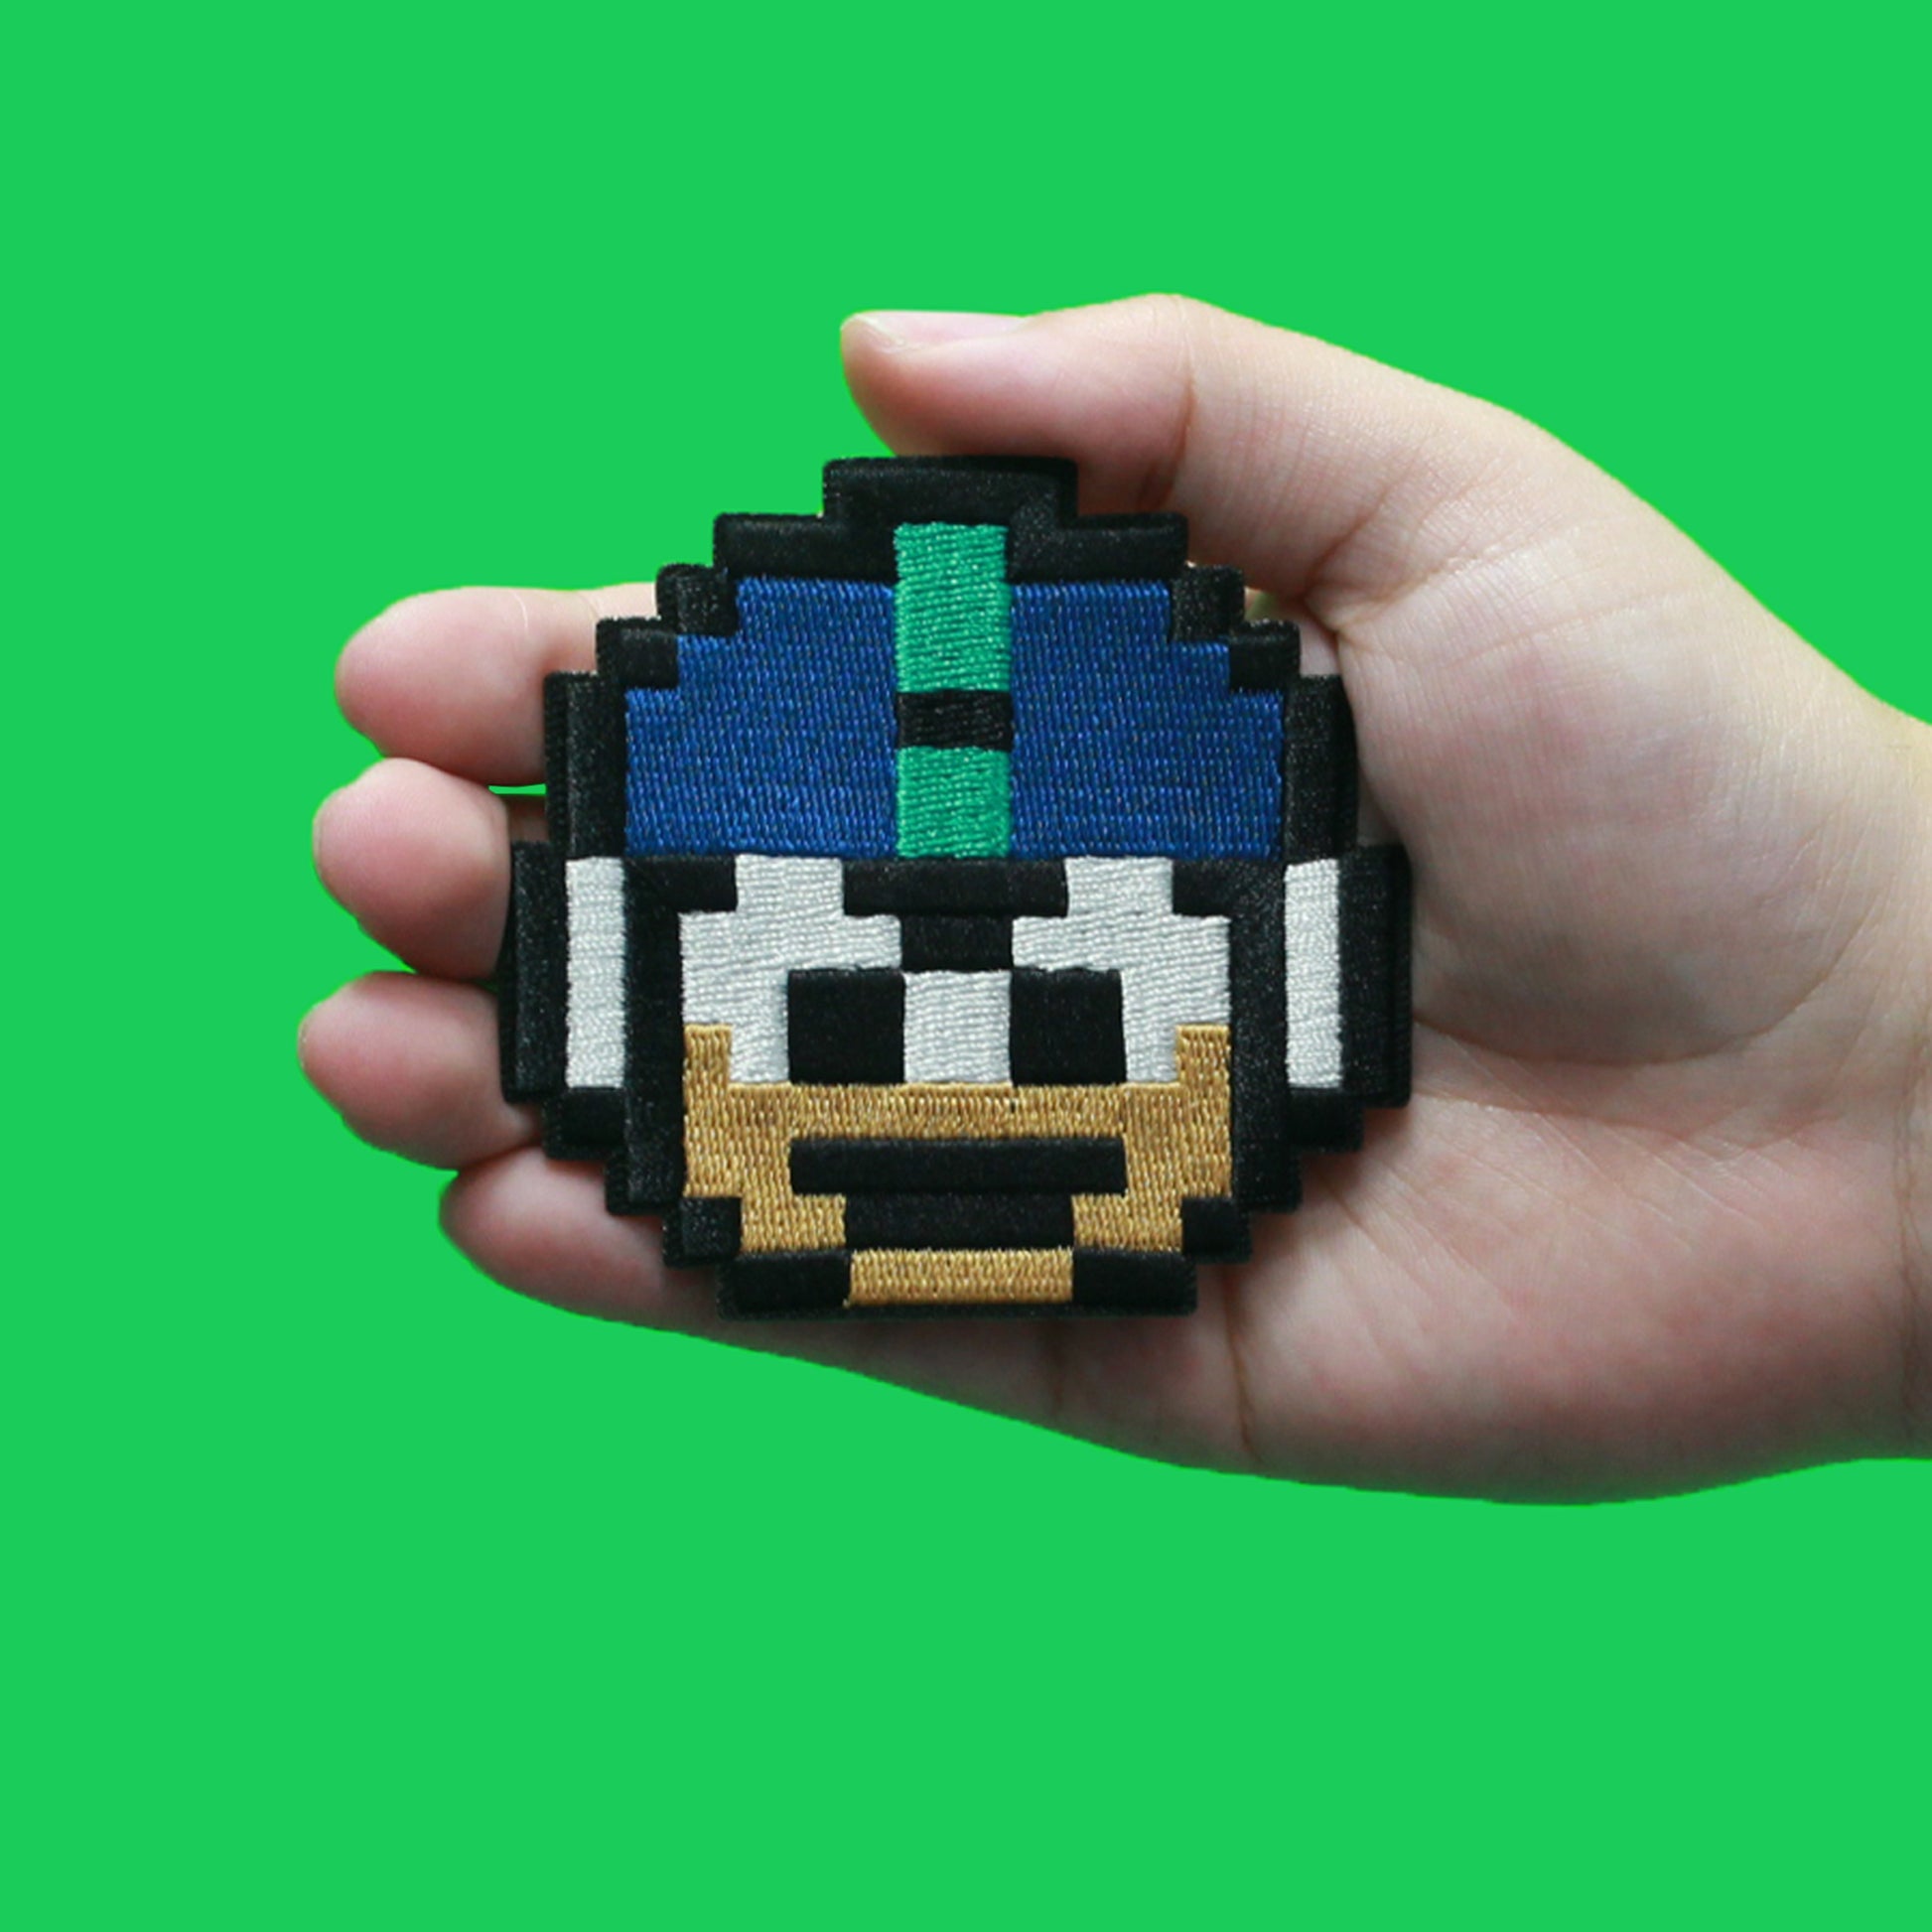 Mega Man Pixel Face Patch Capcom Classic Game Embroidered Iron On